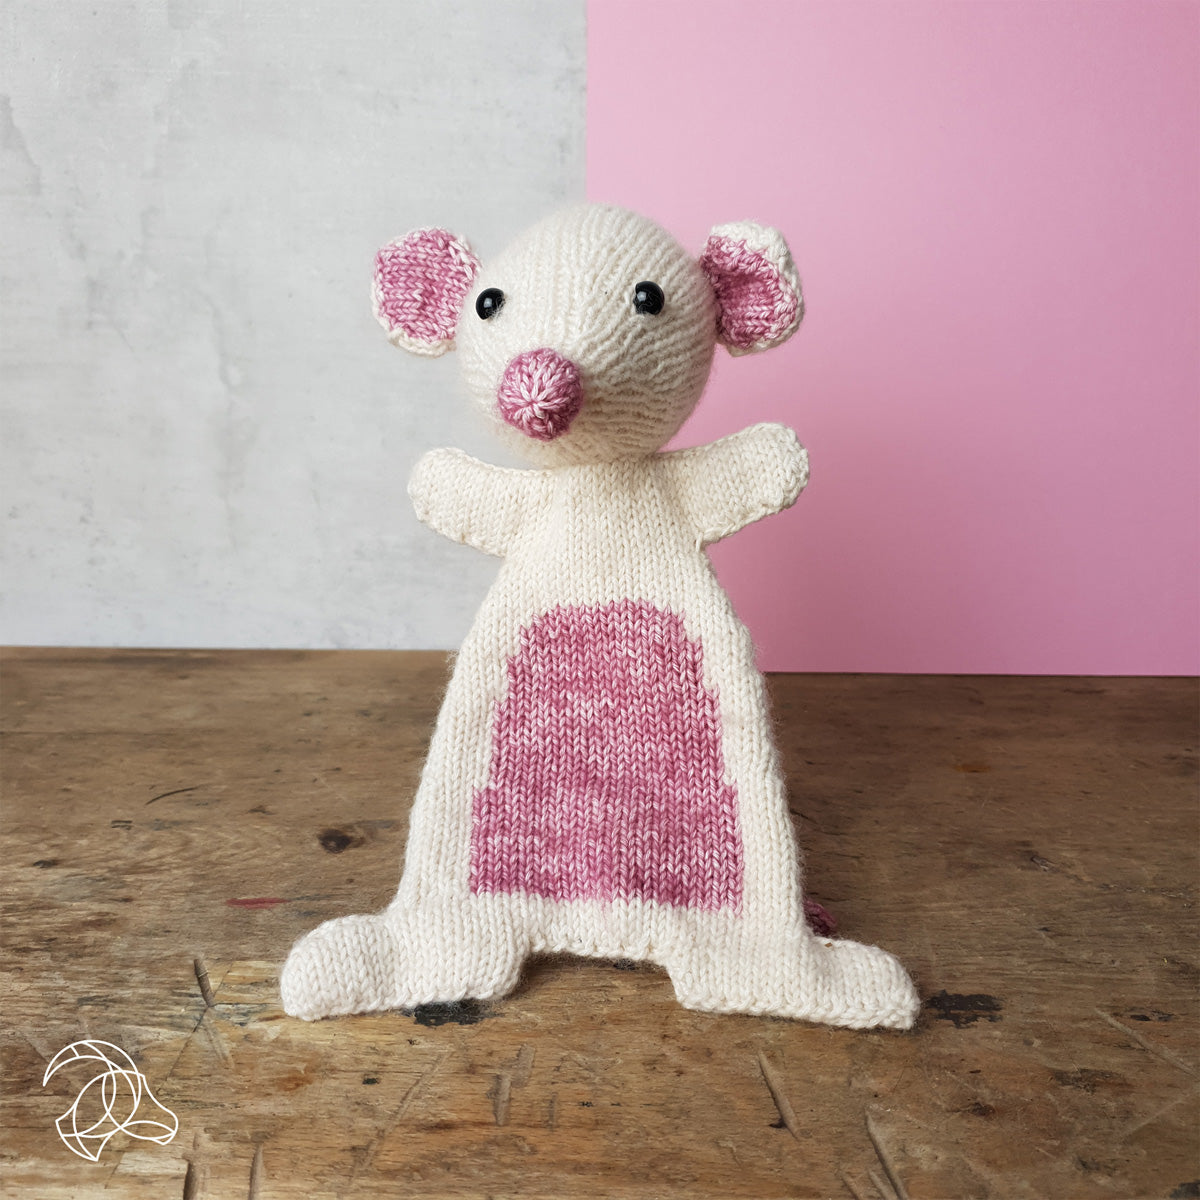 Timmy the Little Mouse - Adorable Knitting Kit from Hardicraft